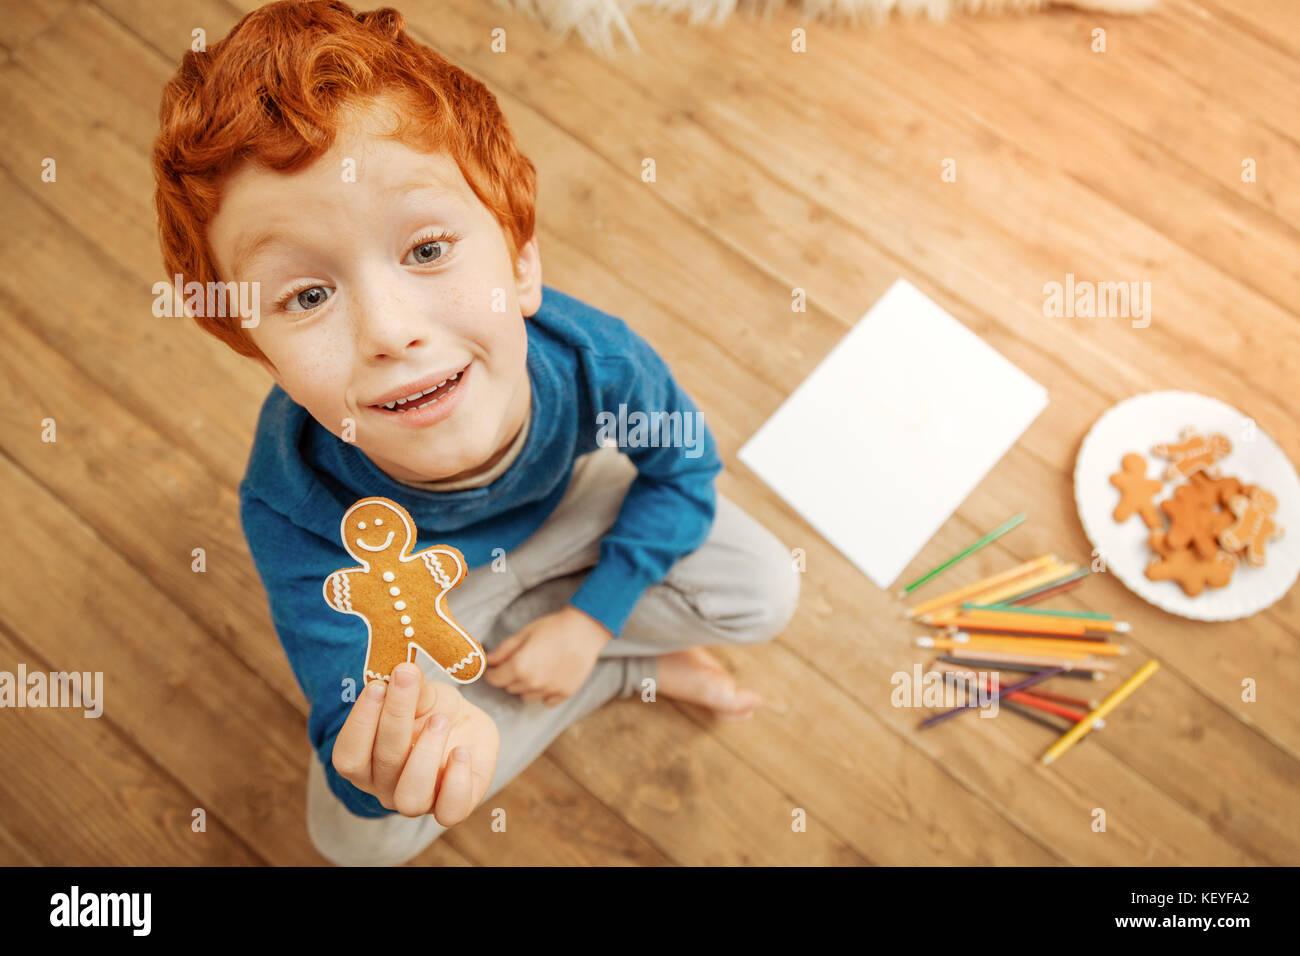 Adorable kid showing gingerbread man into camera Stock Photo